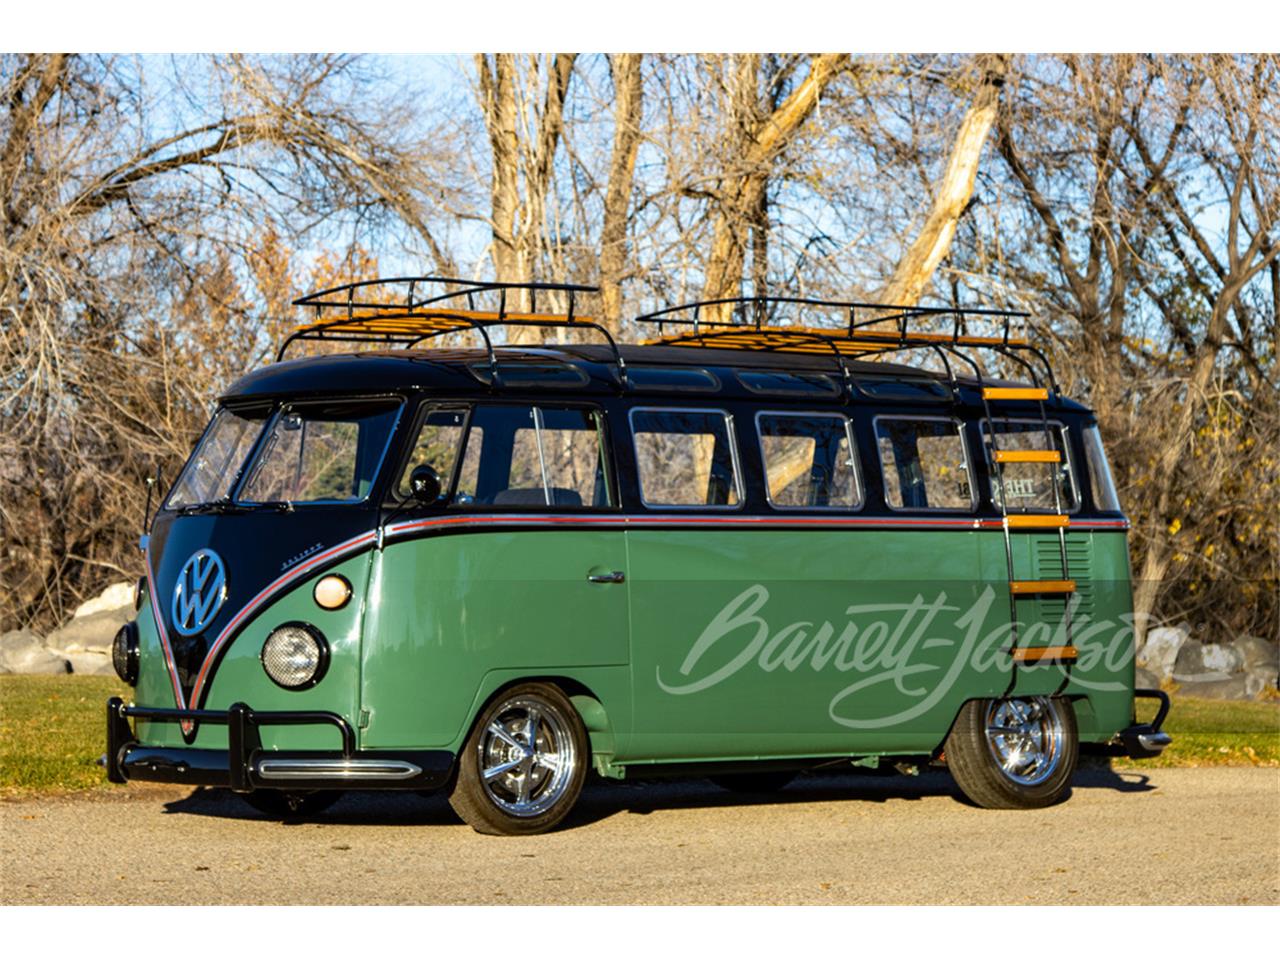 For Sale at Auction: 1974 Volkswagen Bus in Scottsdale, Arizona for sale in Scottsdale, AZ